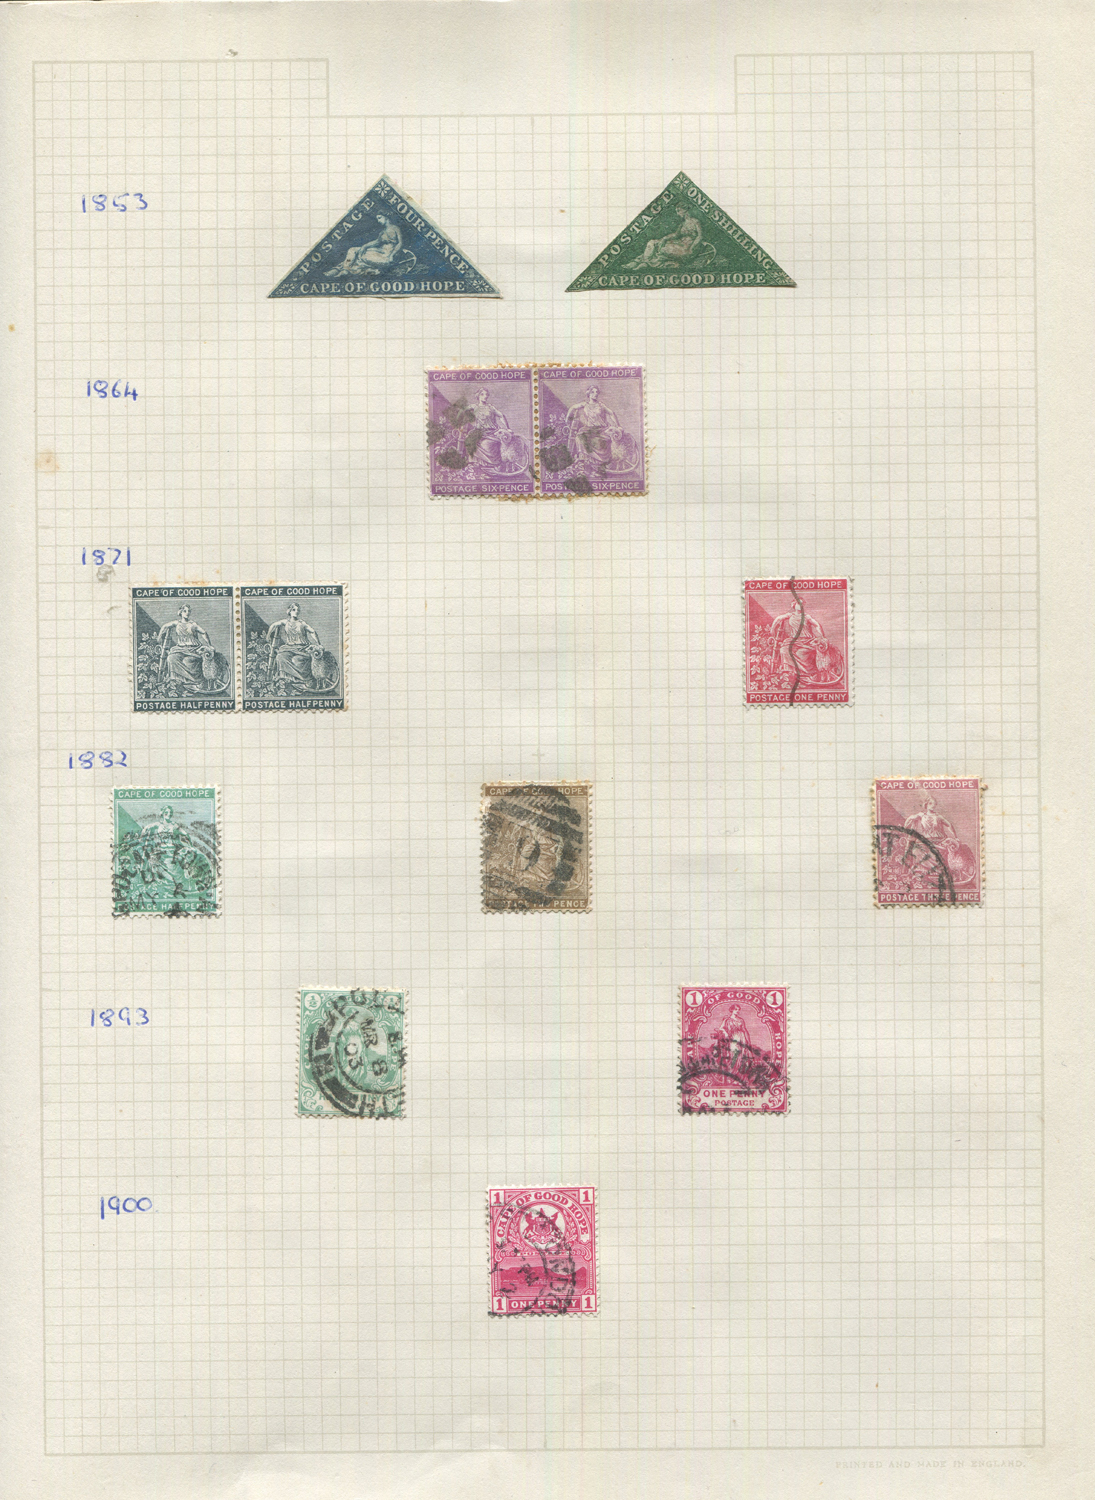 Two albums of world stamps, including Great Britain, Australian States, Hong Kong 1863 to 96 cents - Image 4 of 4